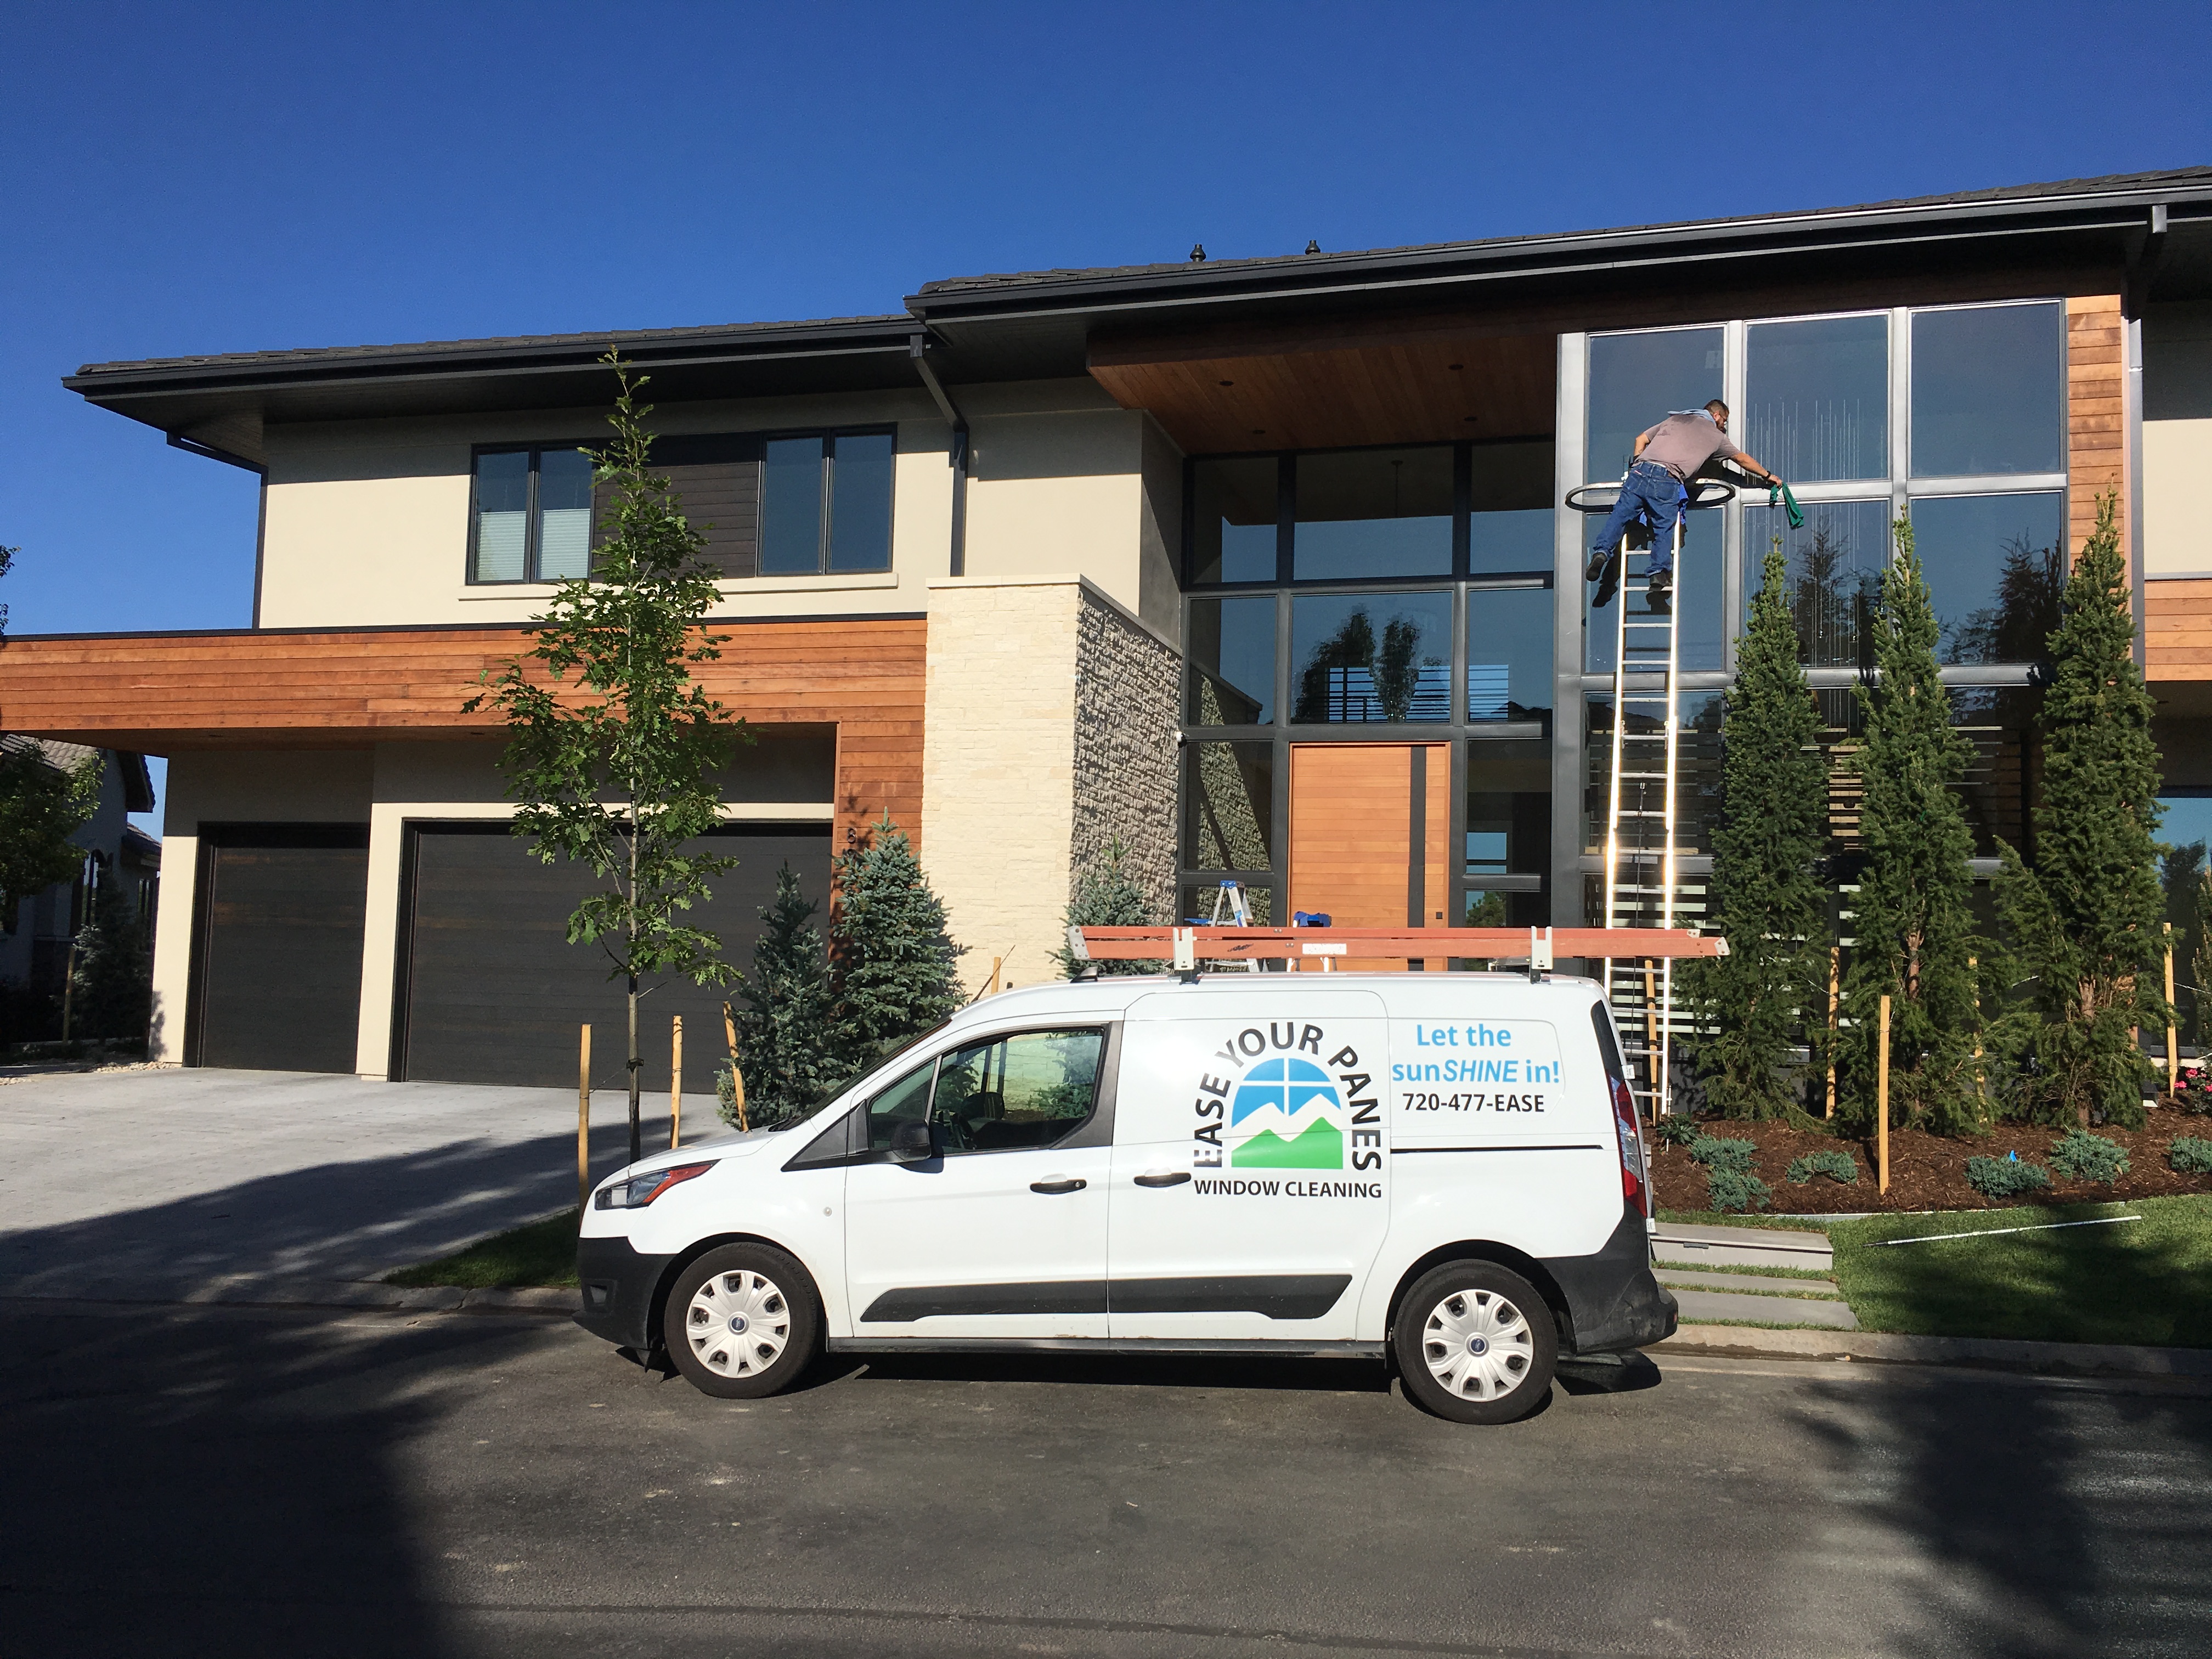 Denver’s Trusted Window Cleaning Professionals - BY

|
|
|

[———
== 2
an \ .
, .
a sa [3 3
bo E
Lod : p
}
6 LS
ZB
mel Lm a oF 5 \
NS x Ly I
ala y
hy § “o
Ya NK J =
, »
- /
3 fa v

OUR

7 % 720-477-EASE
&lt; &lt;

m
pa wn
a» "9%, \DOW CLEANING

Sap.